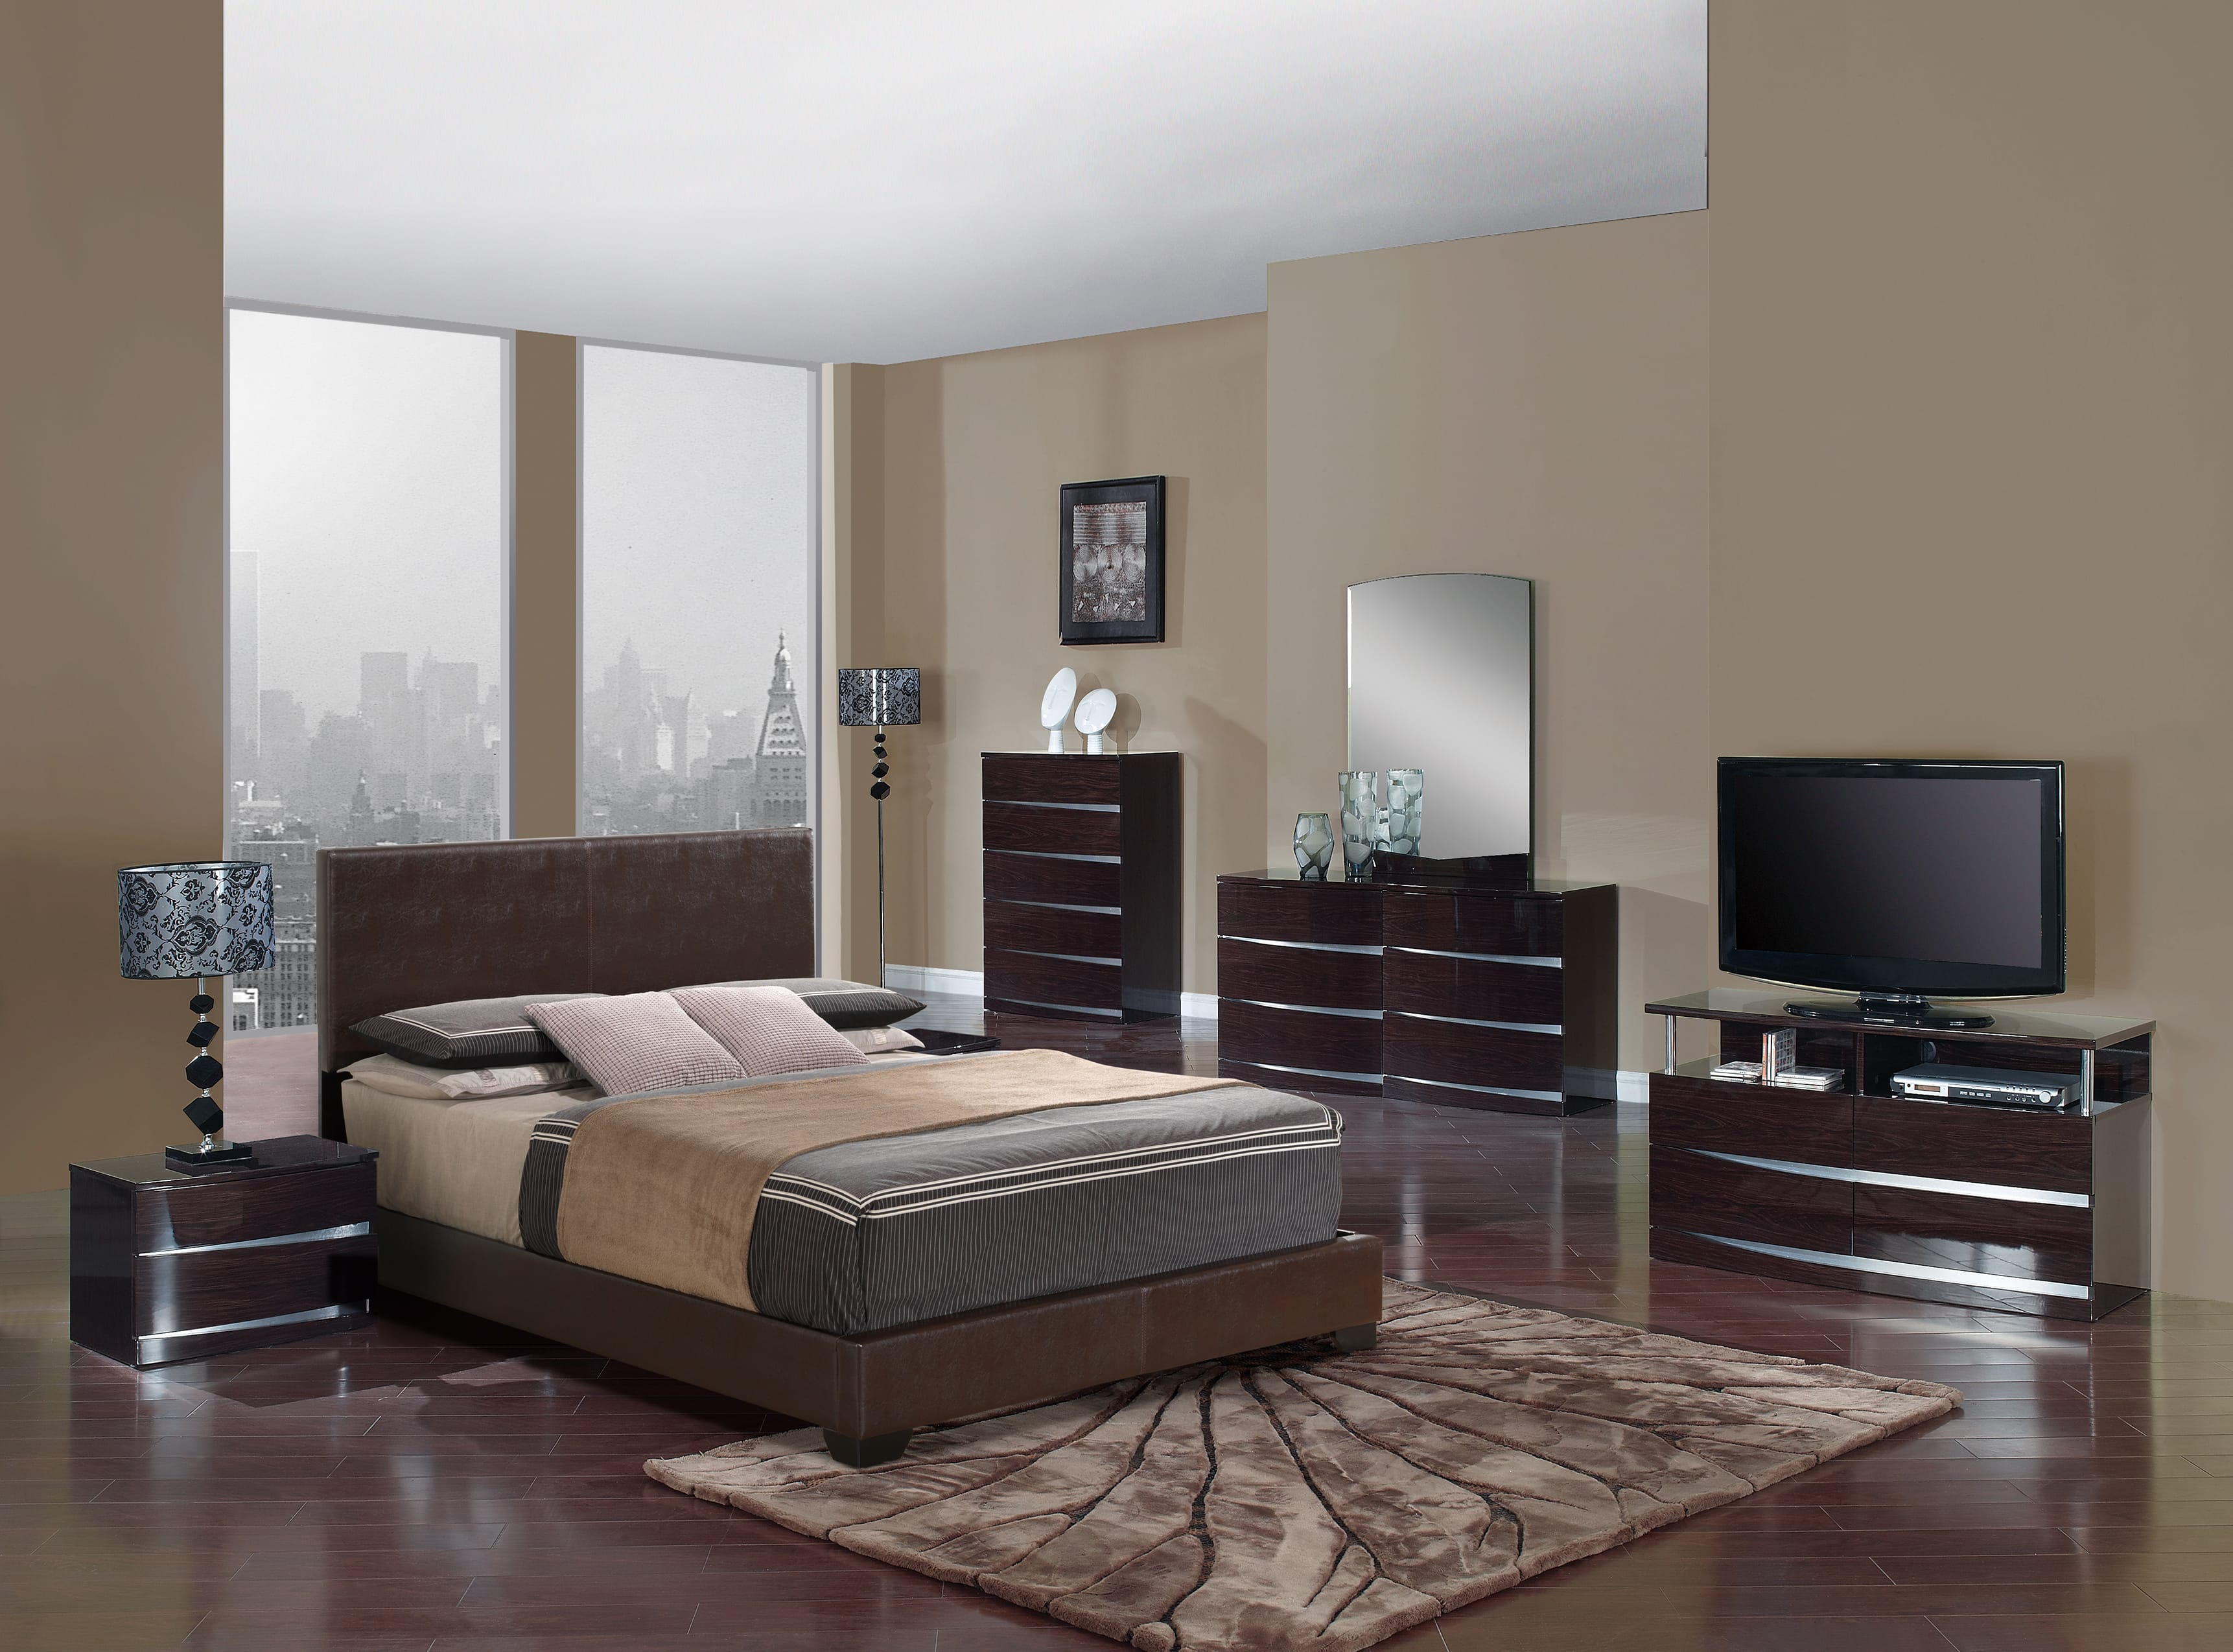 Aurora Wenge Glossy Bedroom Set W8103 Brown Pu Bed Global Furniture within dimensions 3445 X 2549